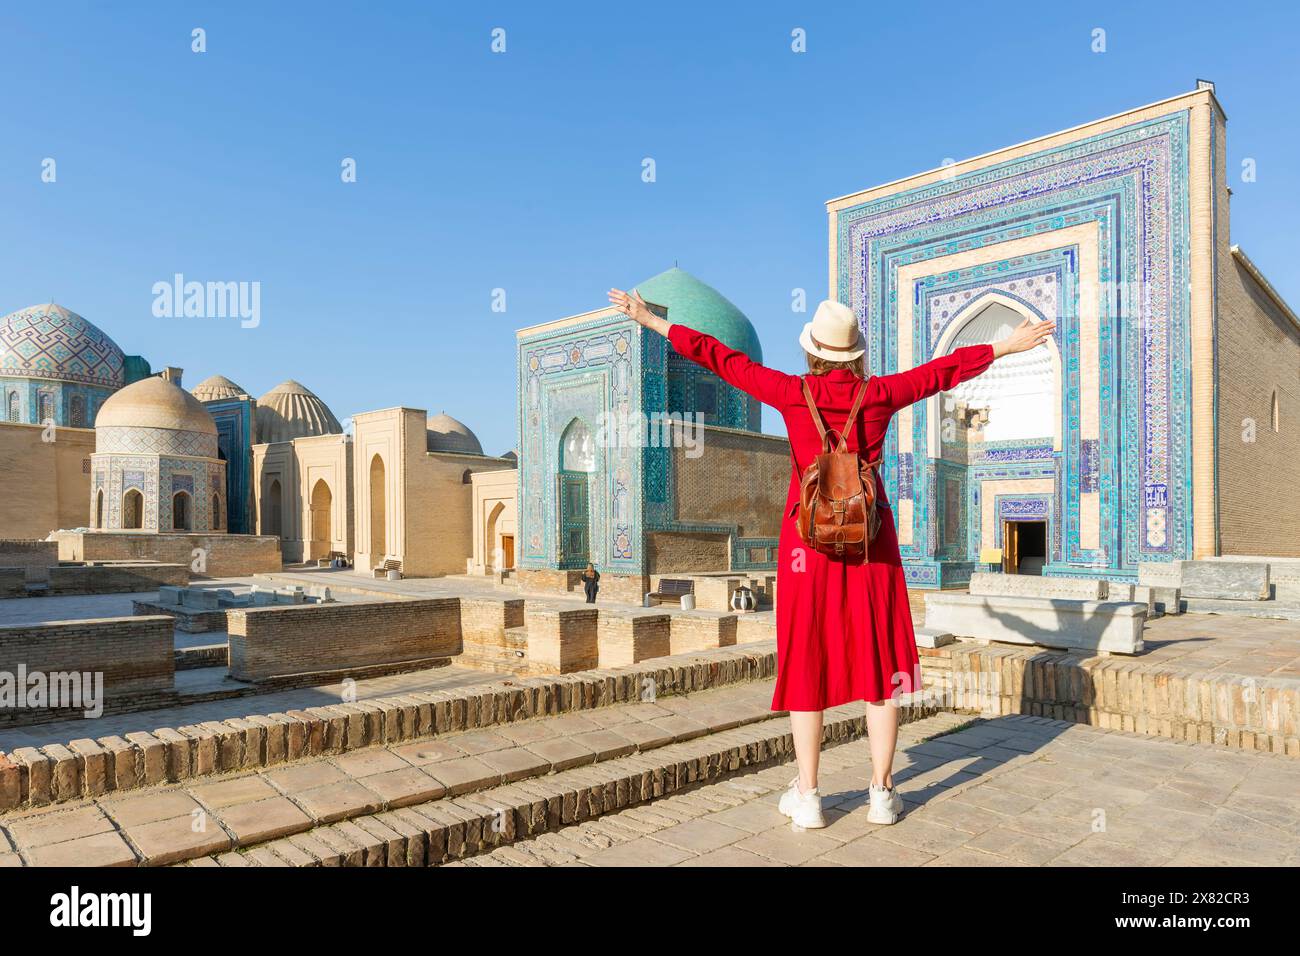 Young tourist dressed in red with arms raised in front of the Shah-I-Zinda memorial complex in Samarkand, Uzbekistan. Stock Photo